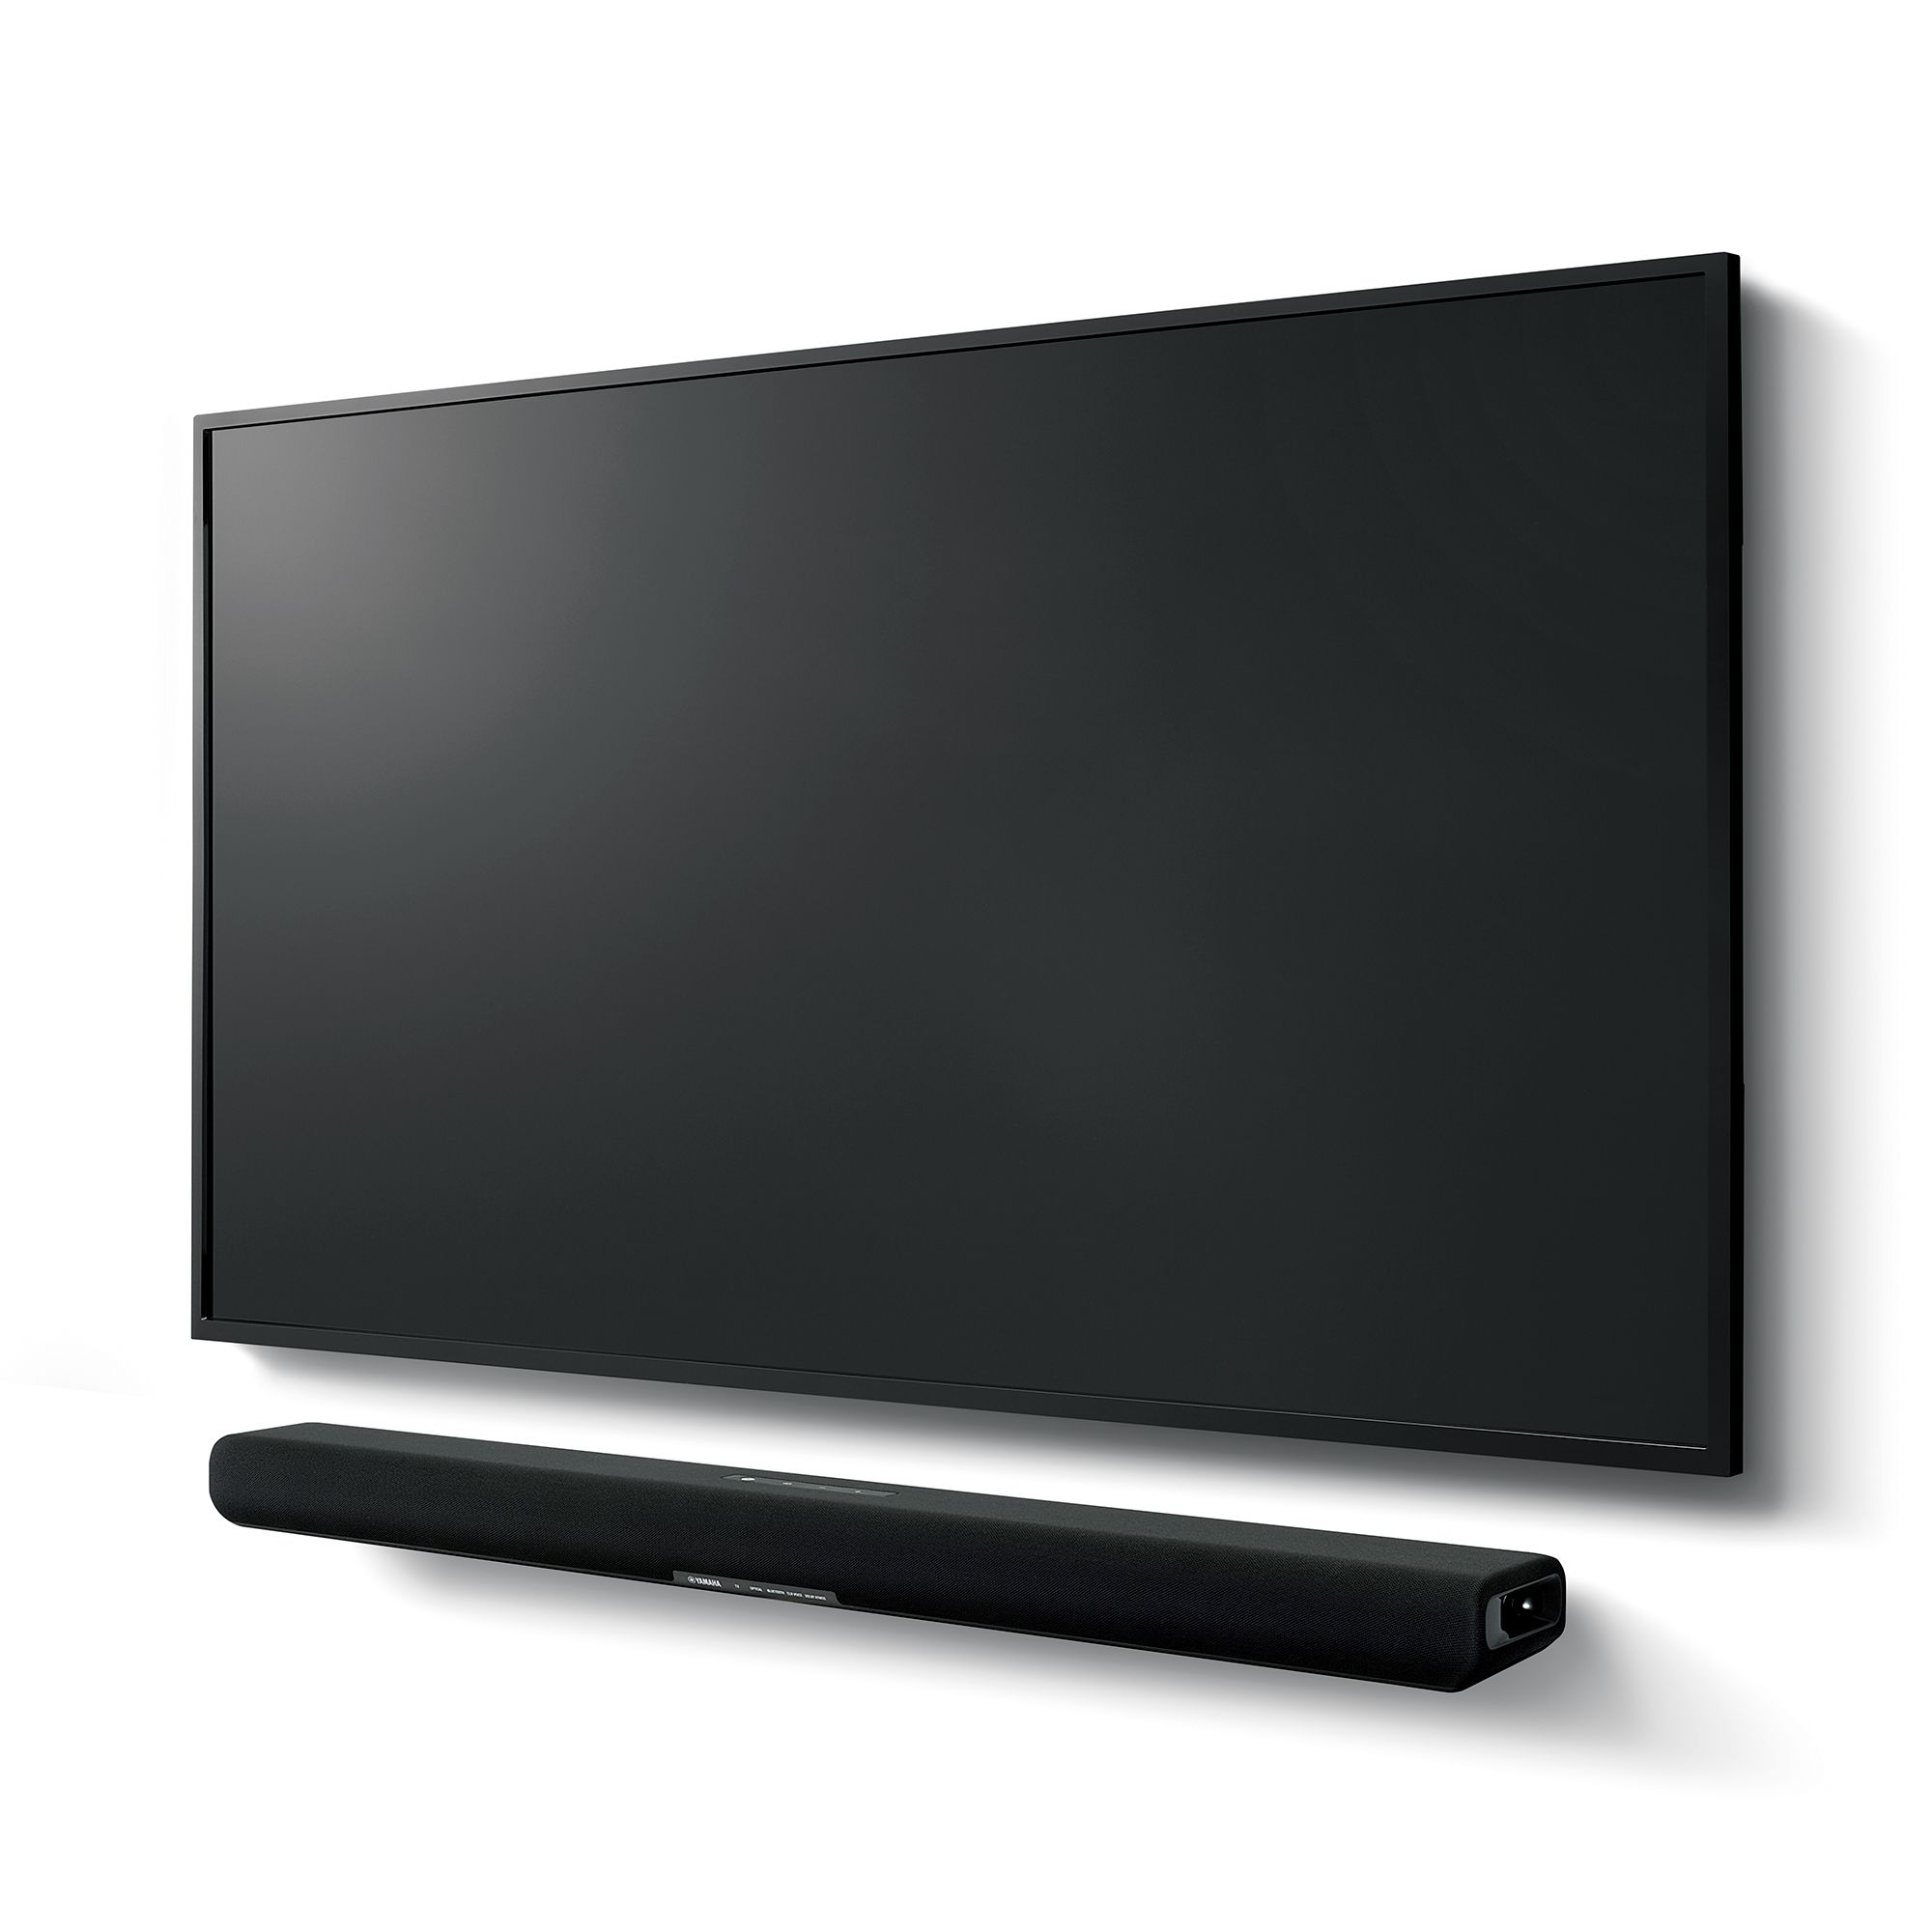 SR-B30A - Overview - Sound Bar - Audio & Visual - Products